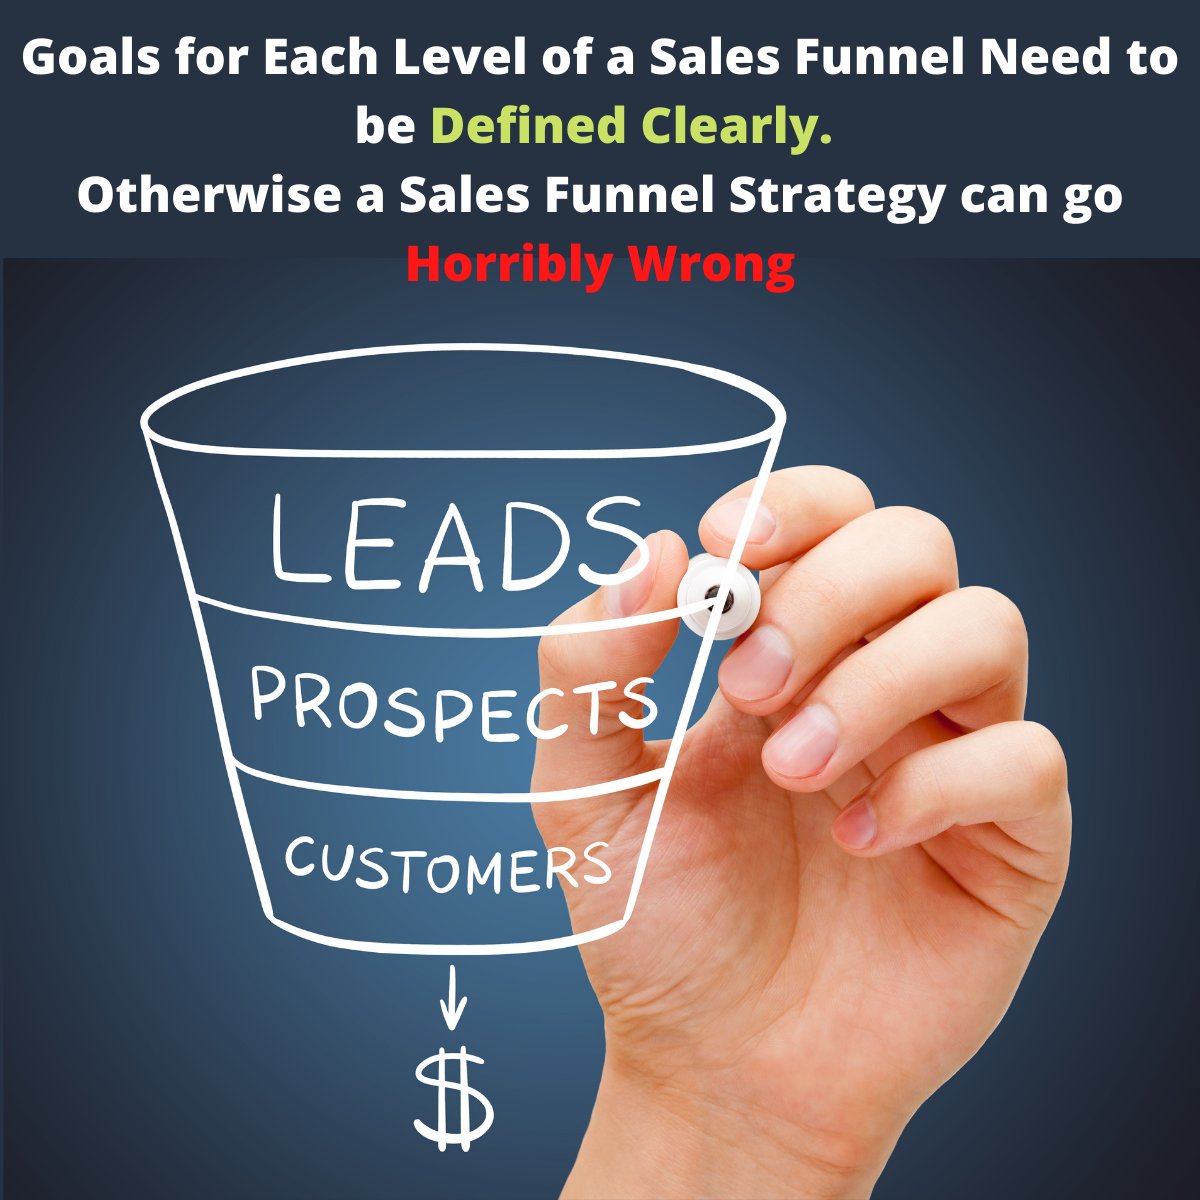 Funnel Design is most Critical Activity. Its very important to get the design right in order to get optimum results

One of the most important things to be done is define the goals for each level of the Funnel
#salesfunnel  #salesfunneldesign #leadmagnets #digitalamarketing https://t.co/2WNAy7vrUI